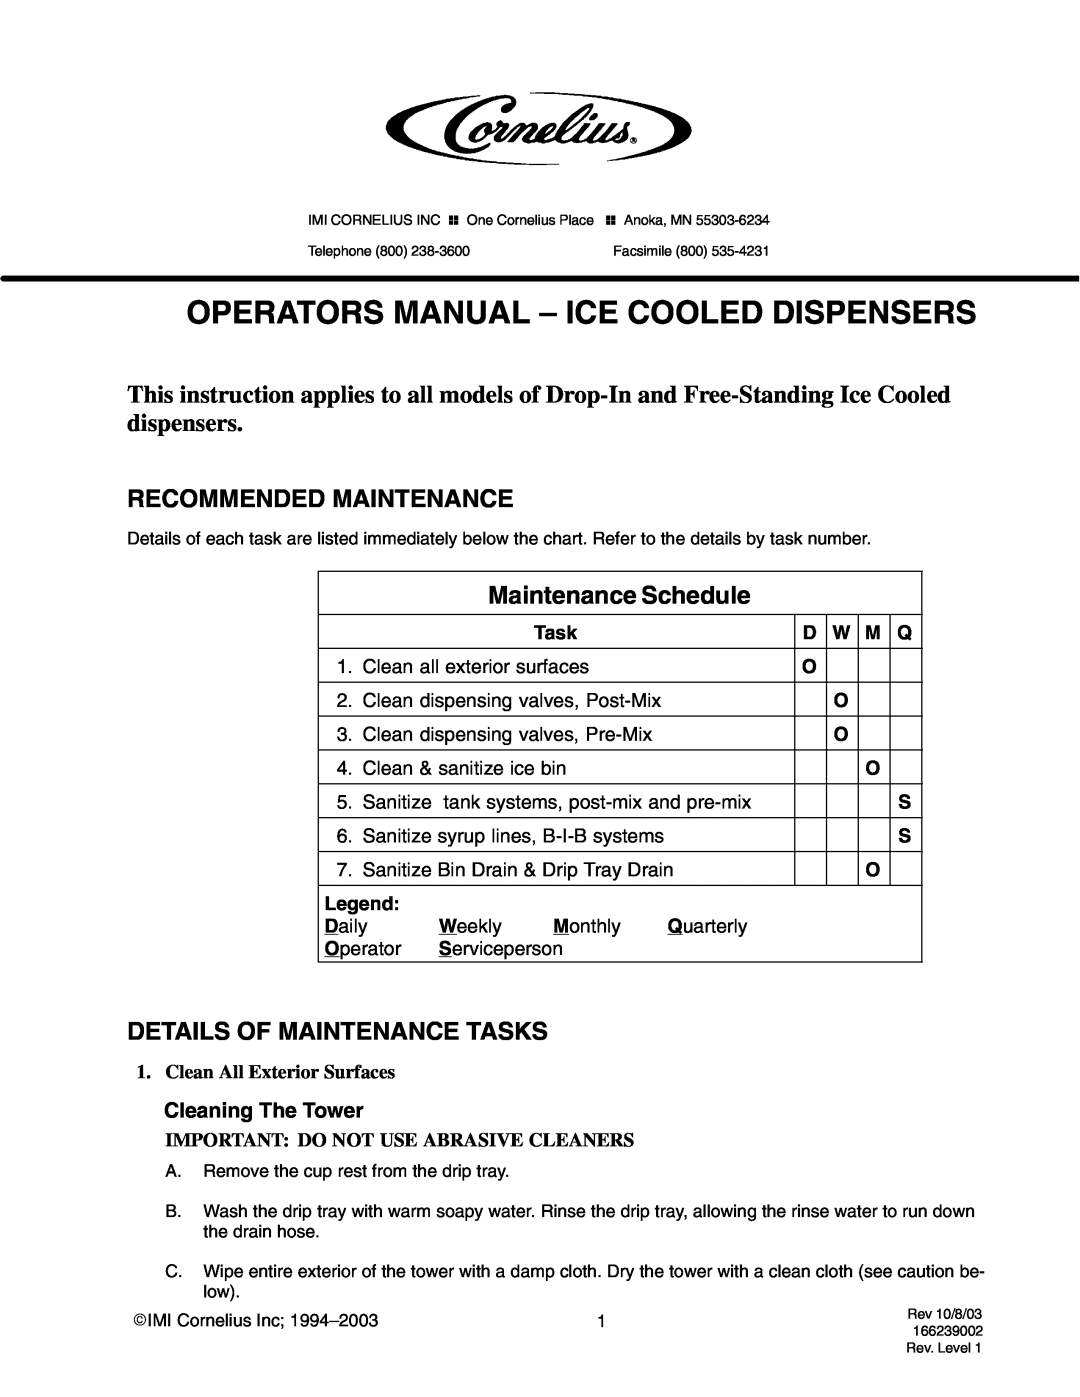 Cornelius manual Operators Manual – Ice Cooled Dispensers, Recommended Maintenance, Maintenance Schedule, Task, Legend 